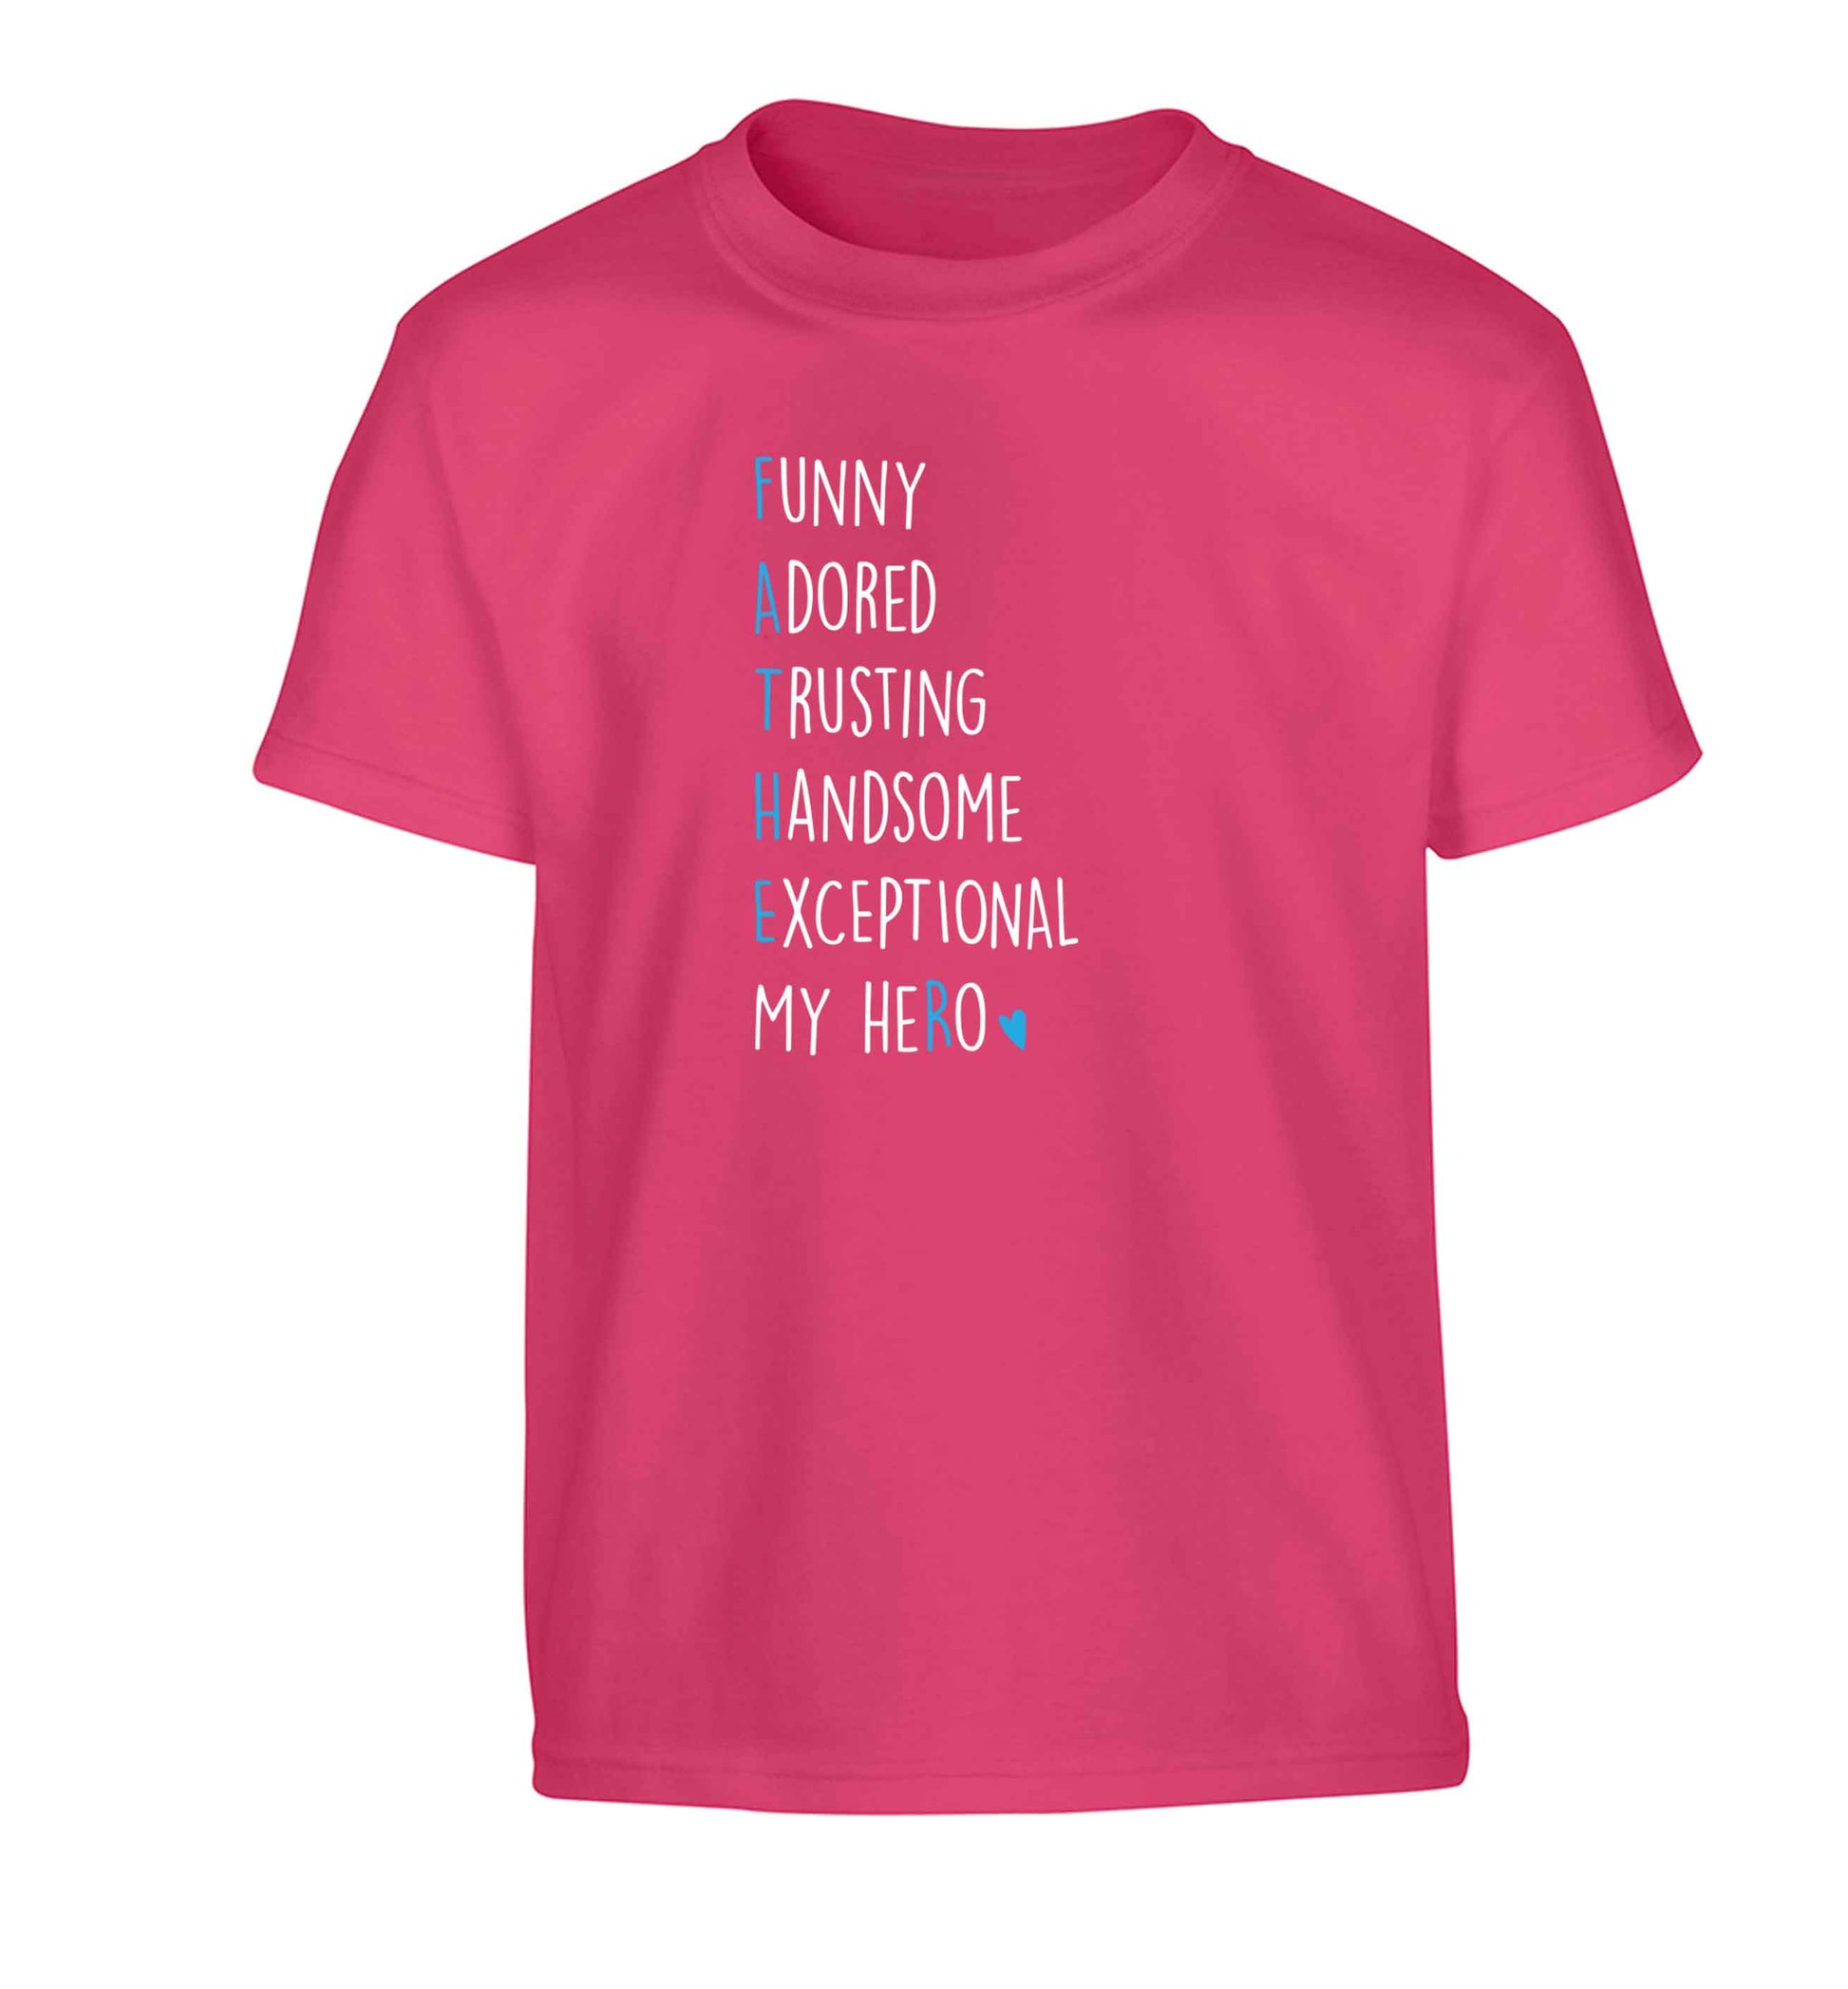 Father, funny adored trusting handsome exceptional my hero Children's pink Tshirt 12-13 Years